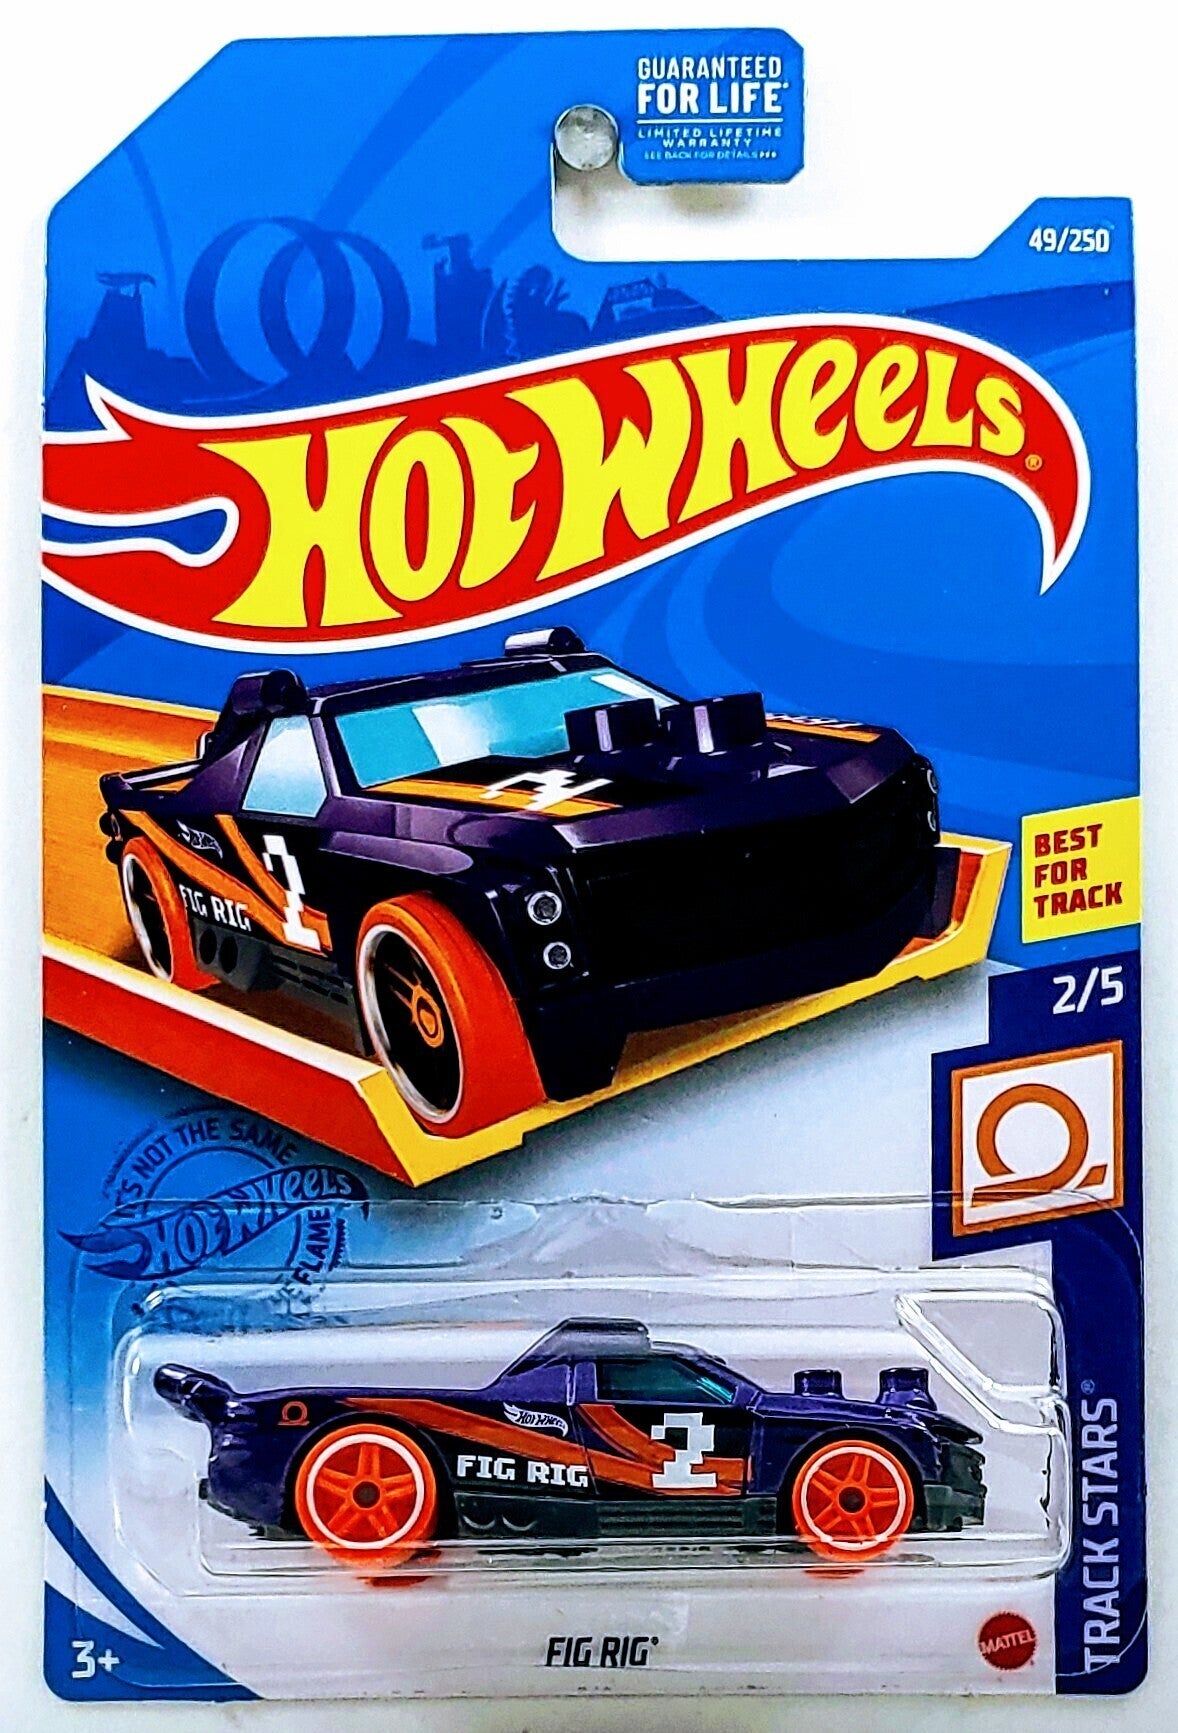 Hot Wheels 2021 - Collector # 049/250 - Track Stars 2/5 - Fig Rig - Purple